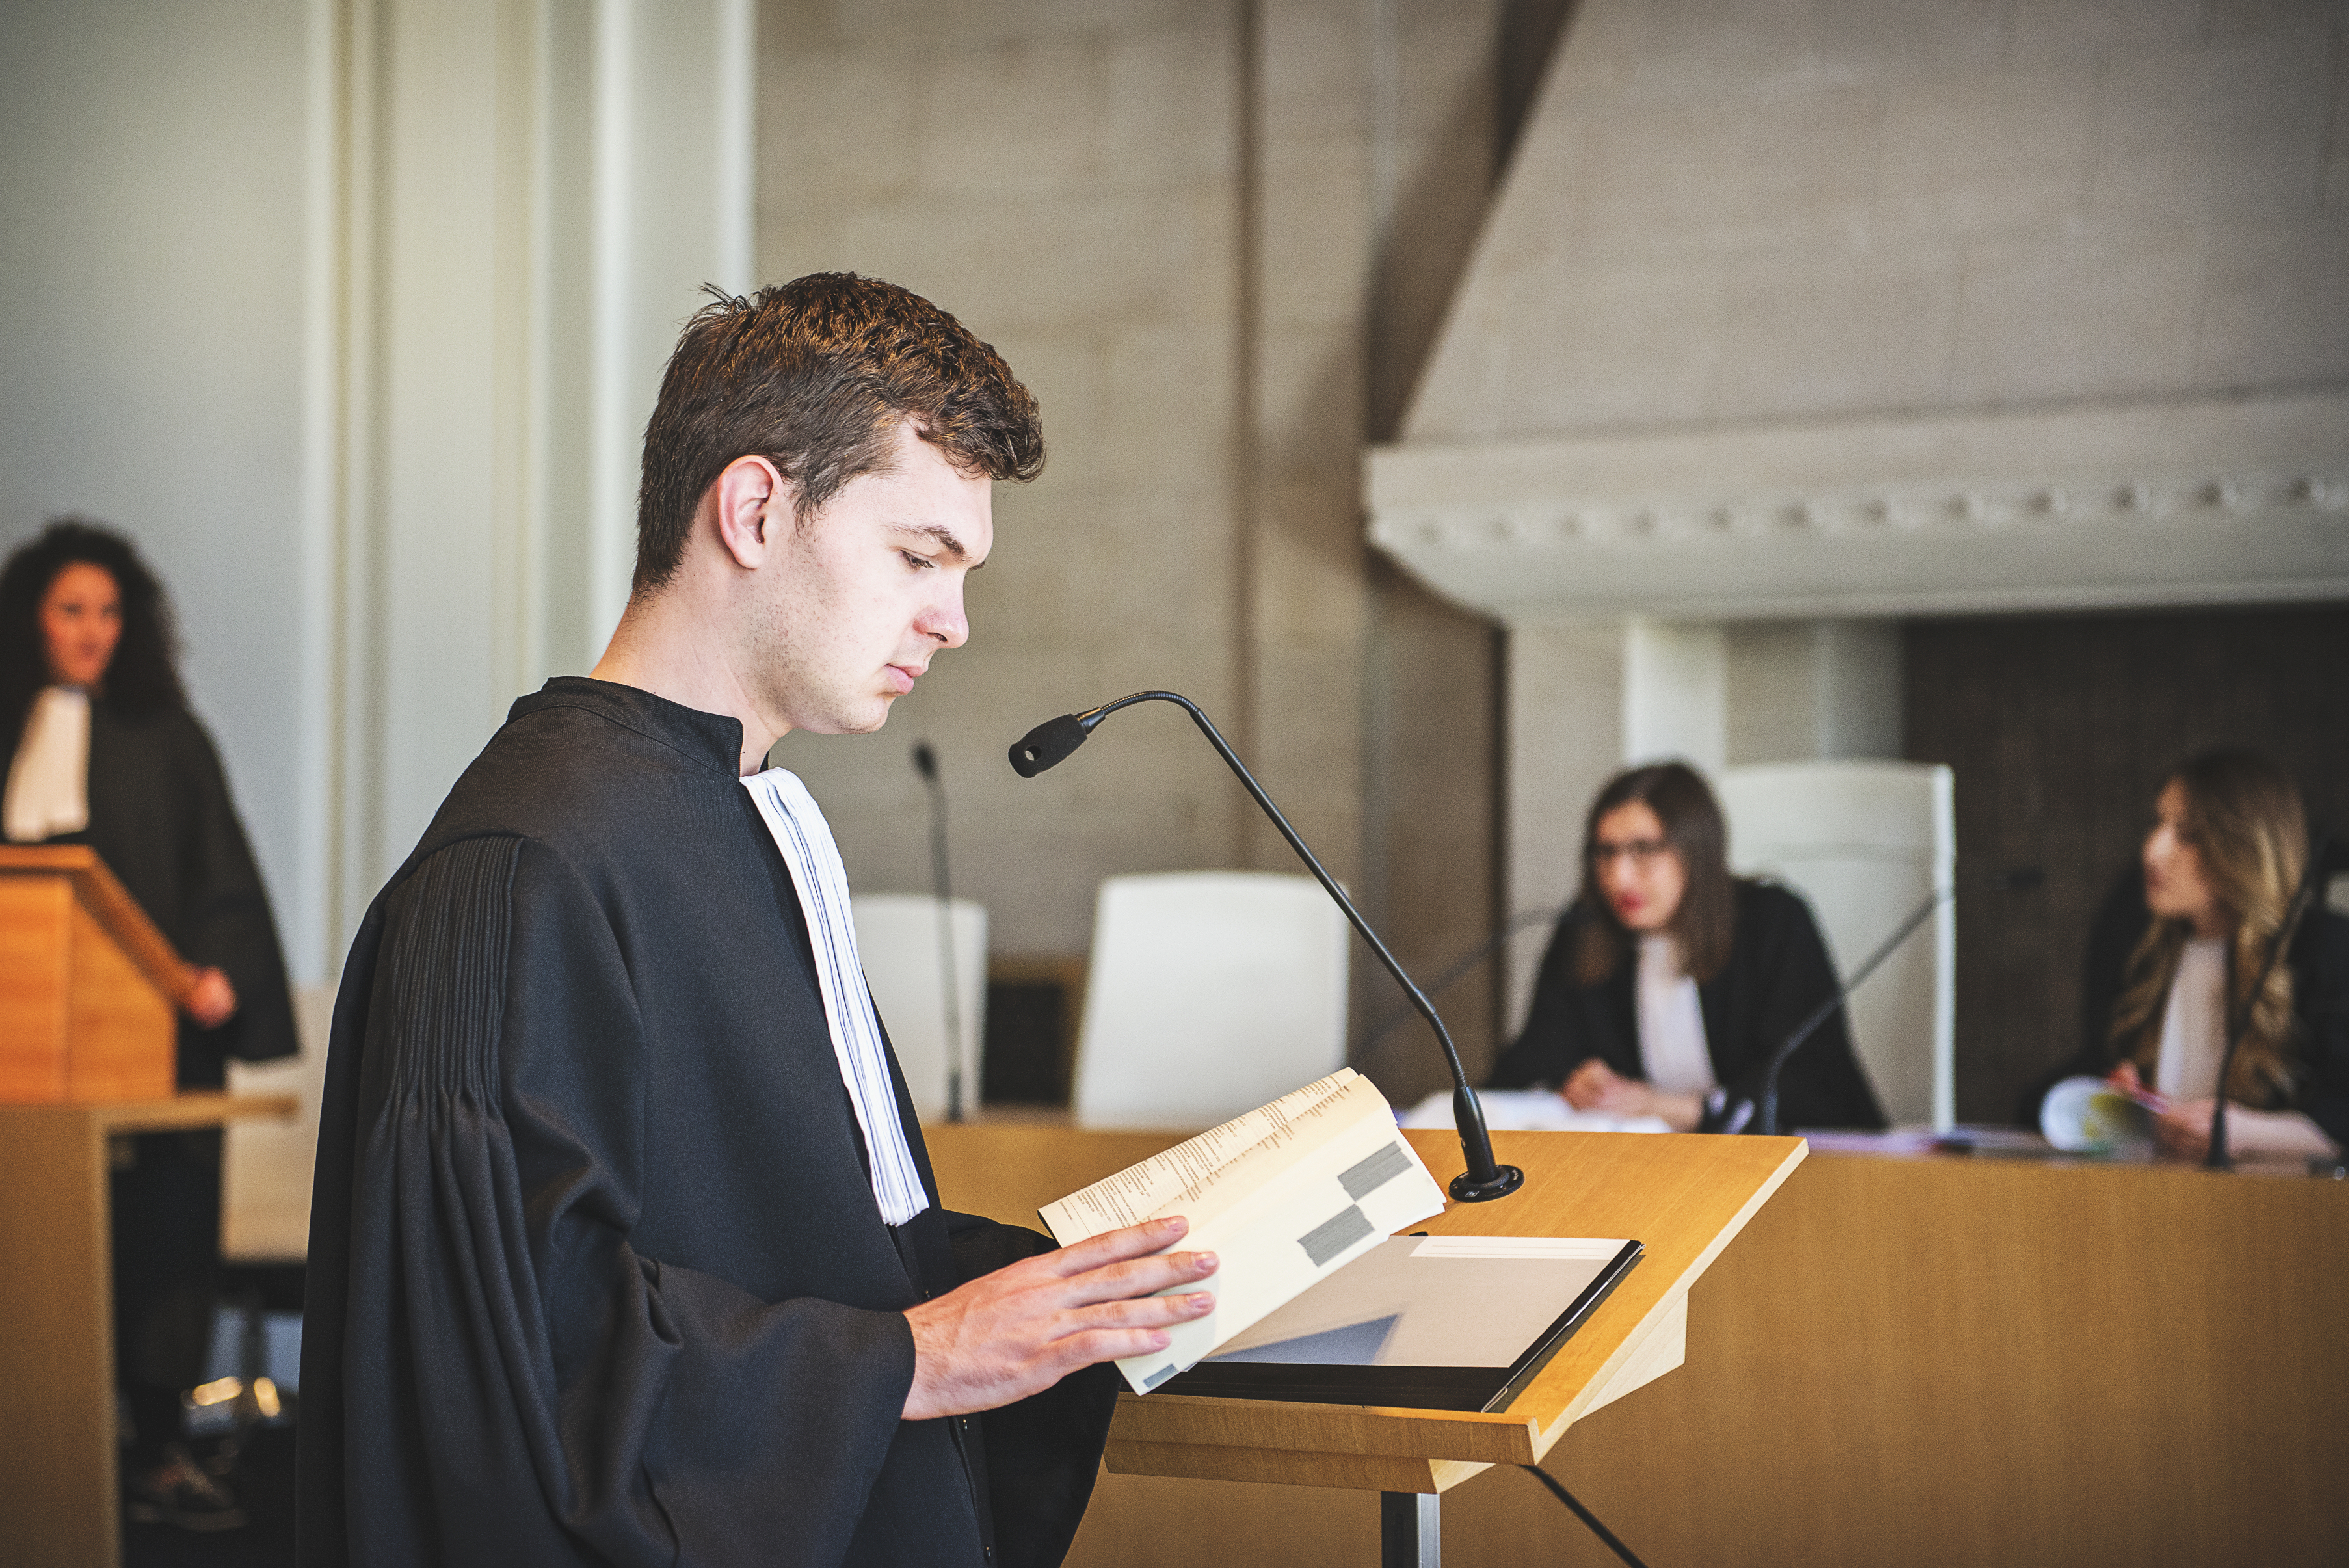 Moot courts